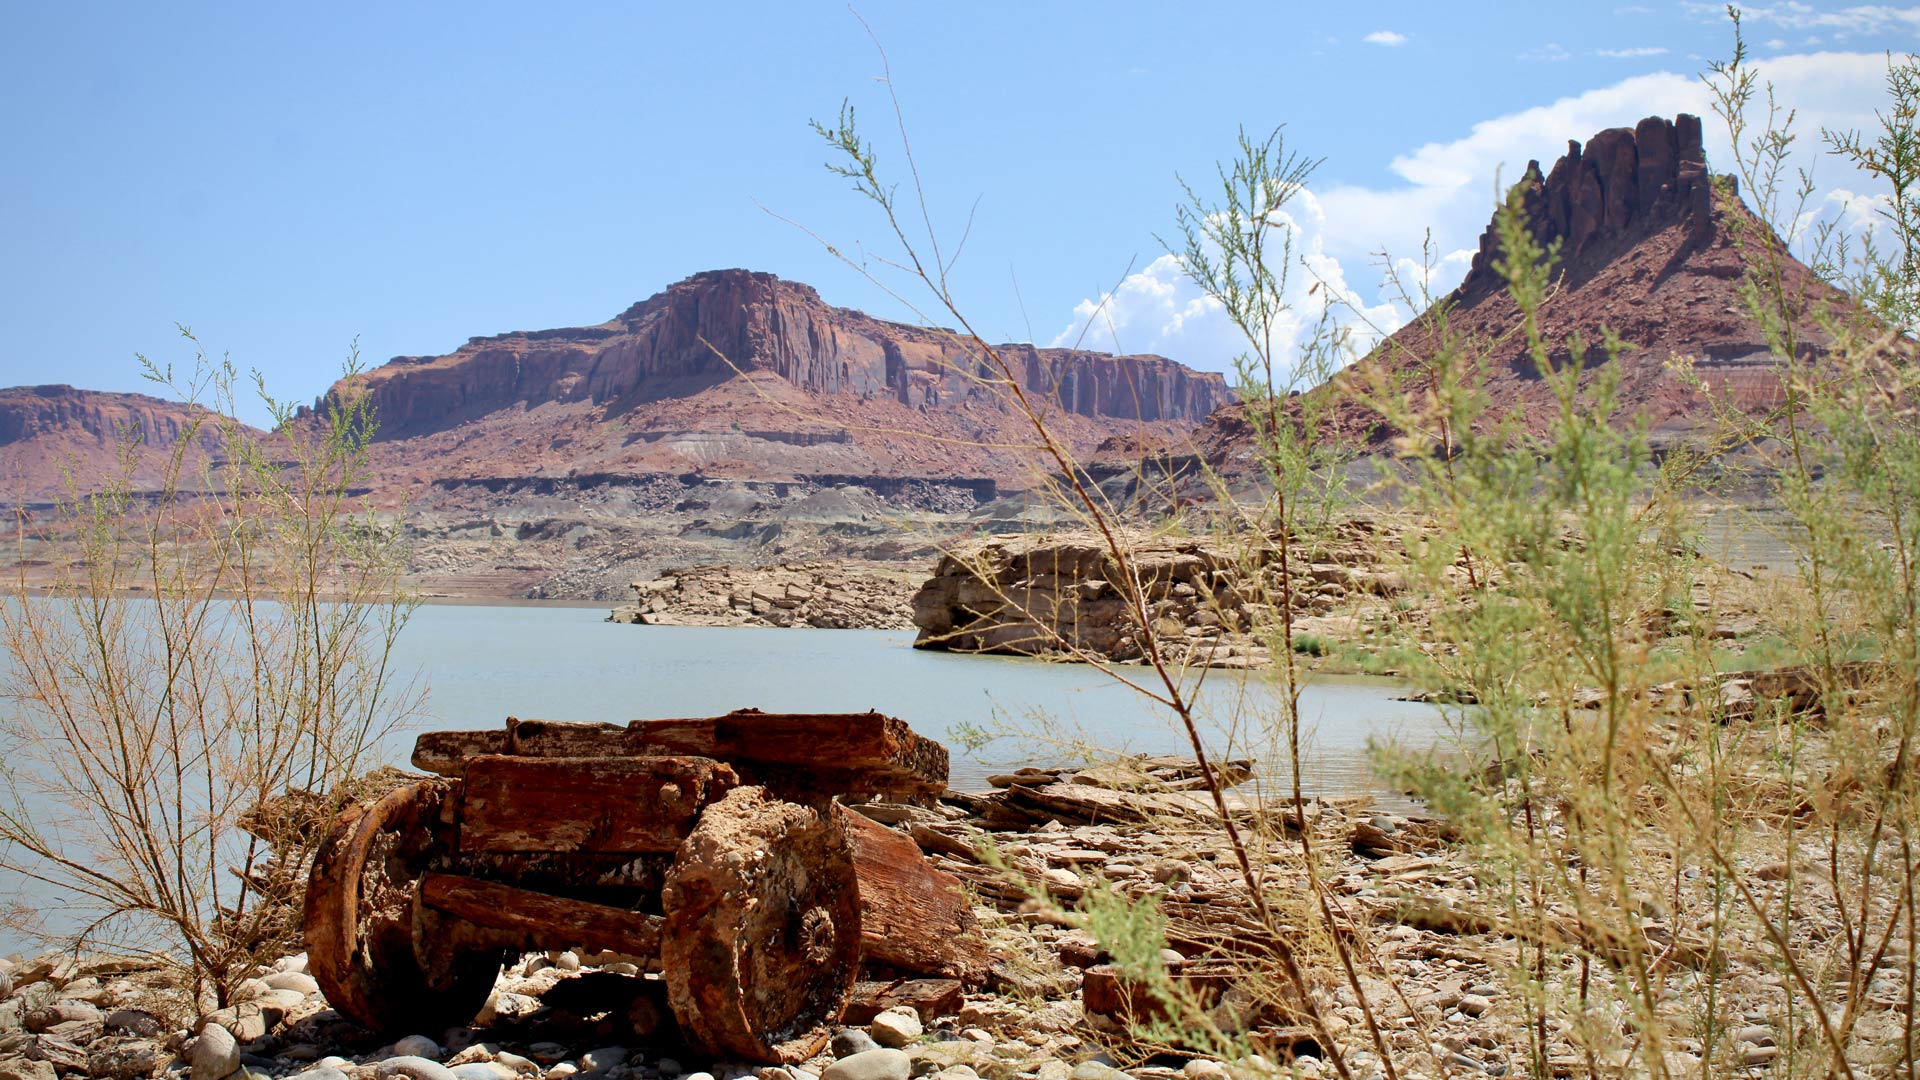 An ore cart, encrusted in invasive mussel shells, rests on a ledge above a receding Lake Powell.